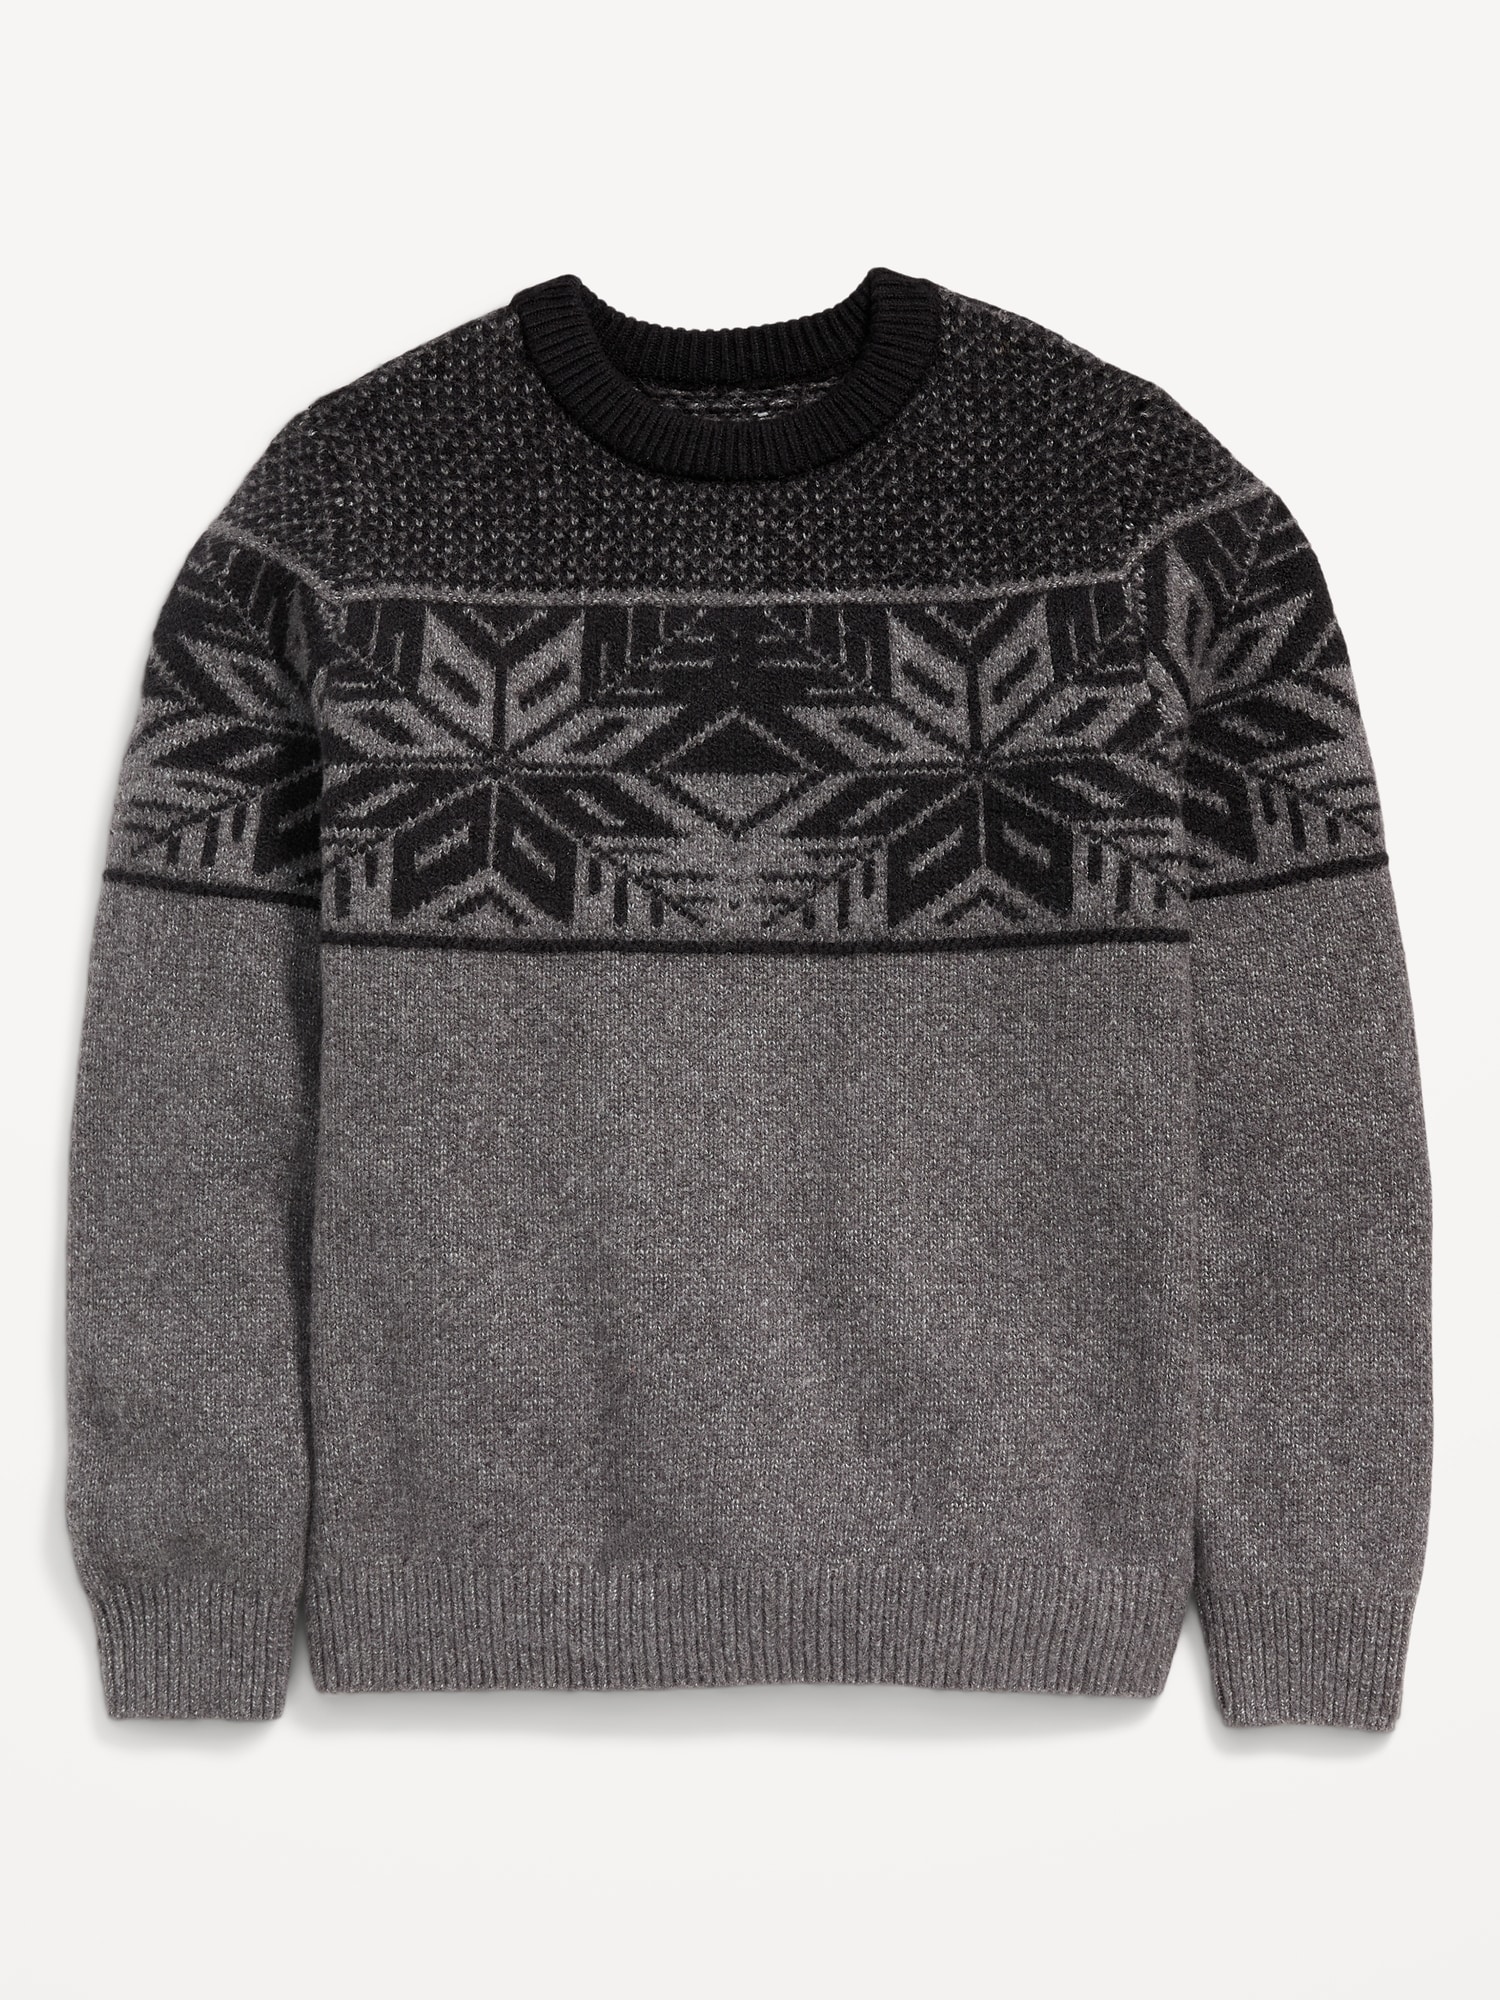 SoSoft Crew-Neck Pullover Sweater for Boys | Old Navy